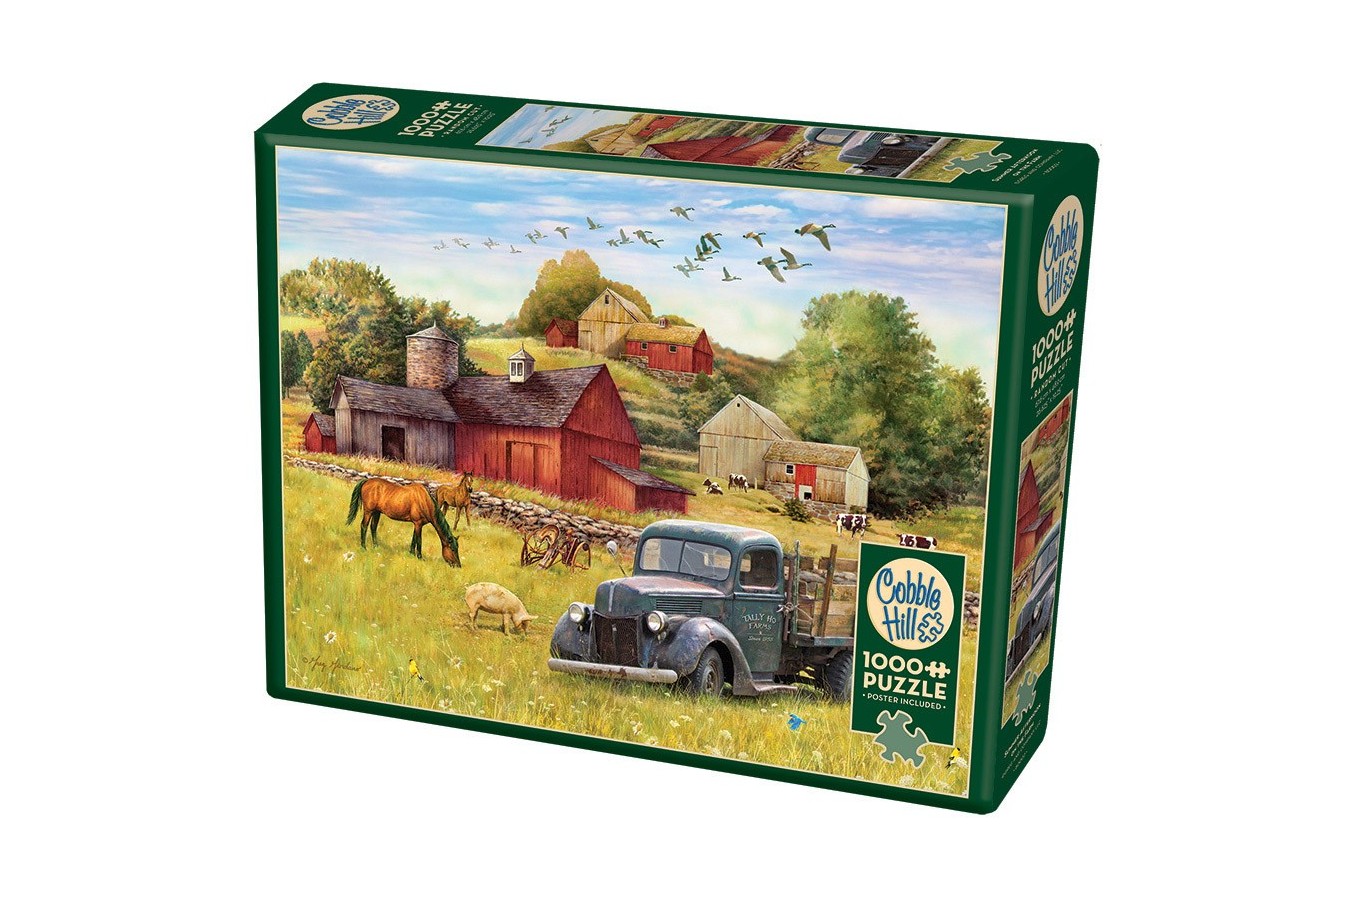 Puzzle Cobble Hill - Summer Afternoon on the Farm, 1000 piese (64949)